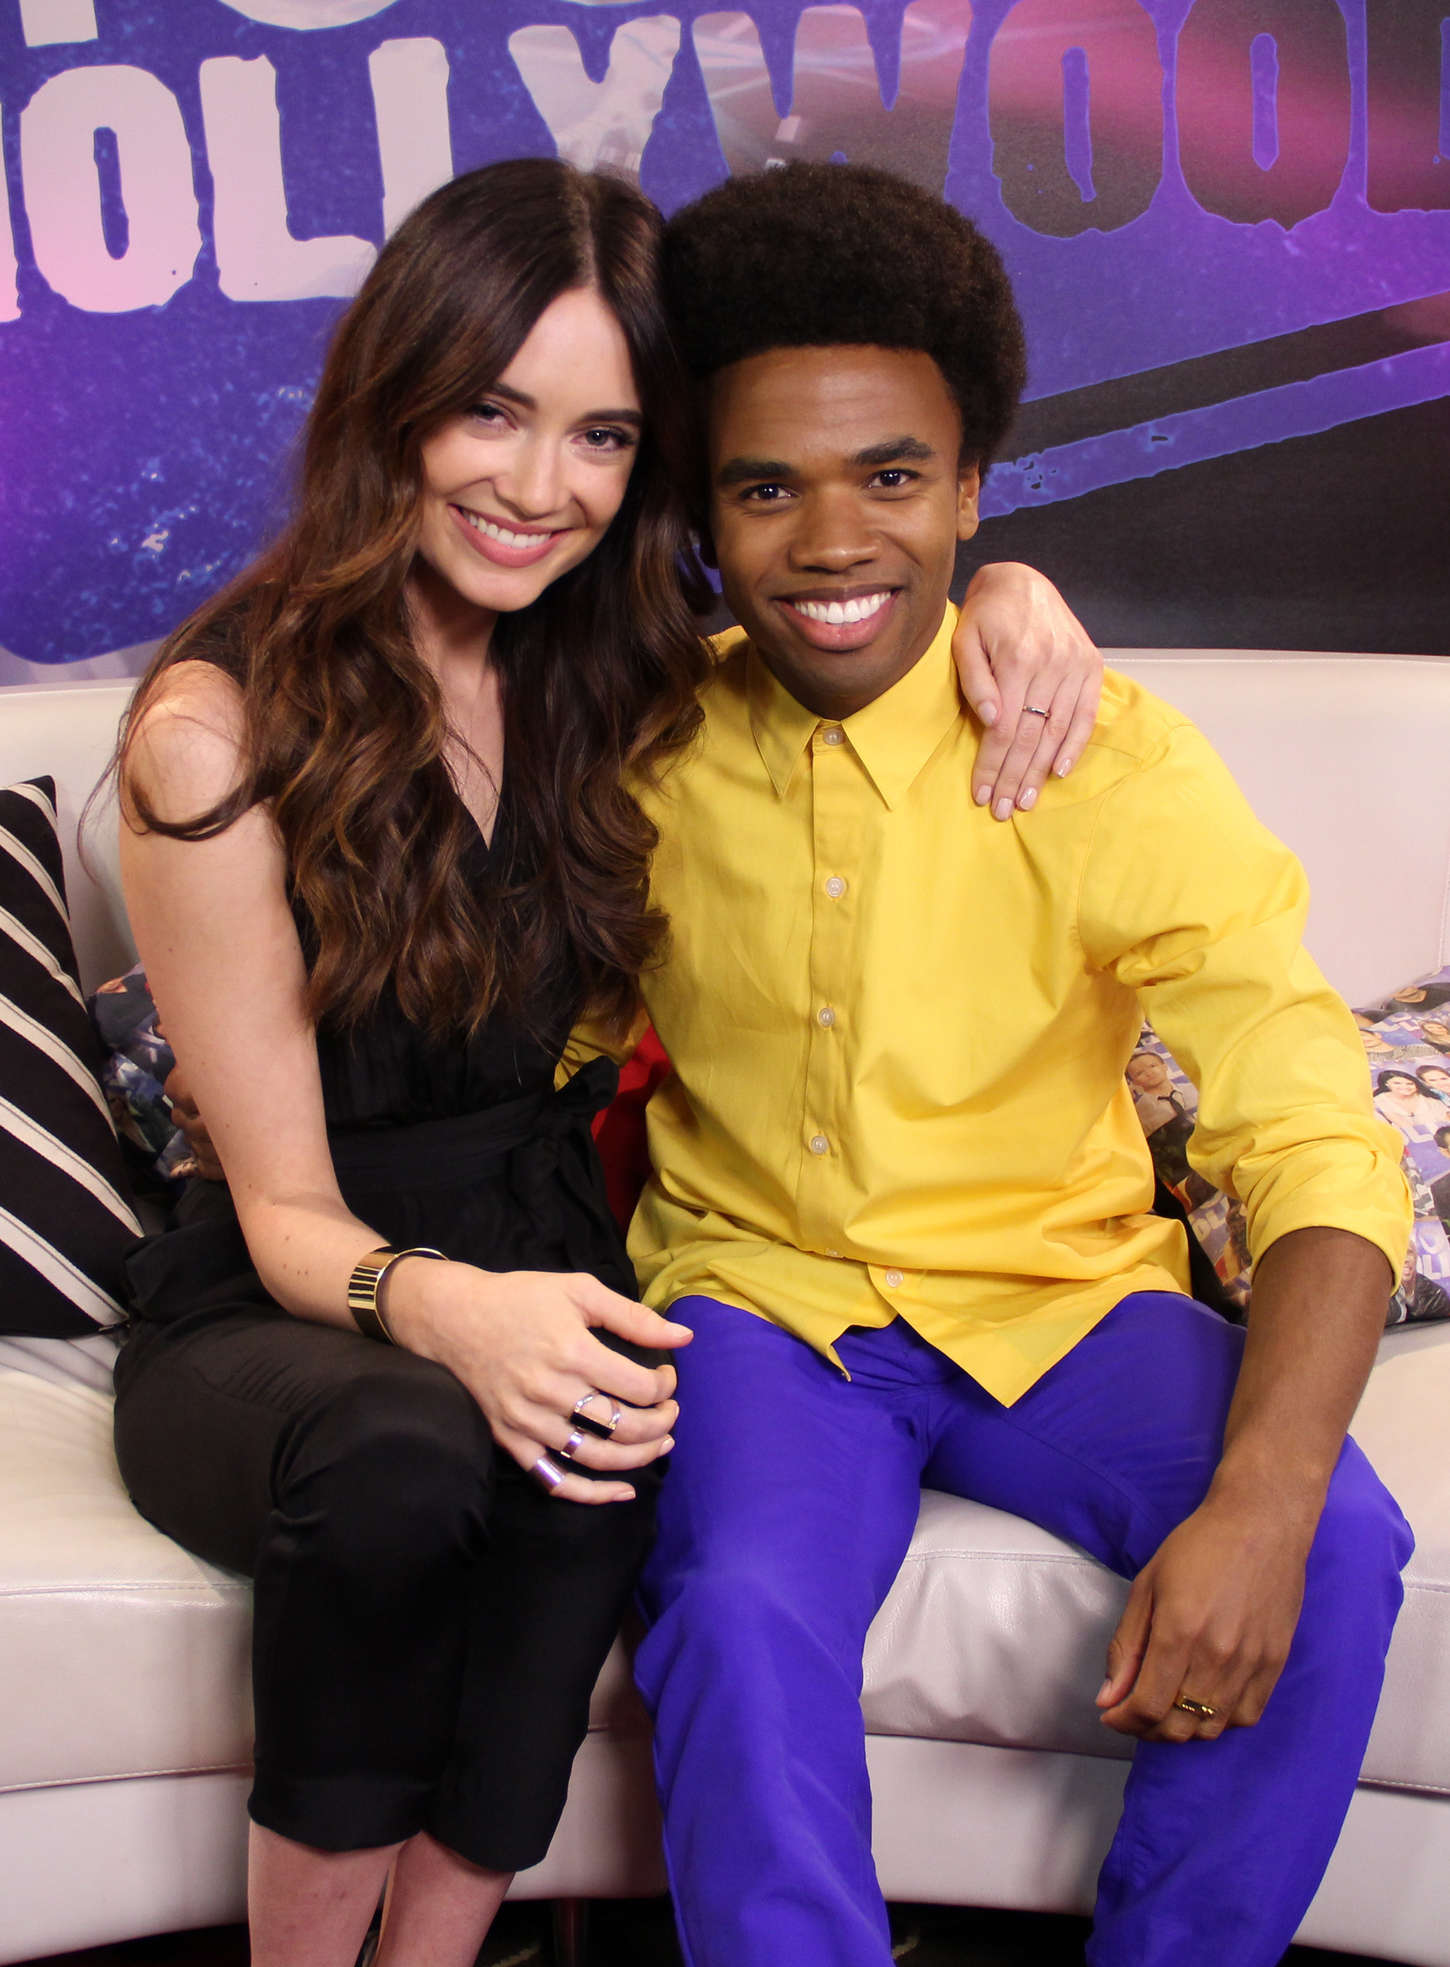 Mallory Jansen Visiting the Young Hollywood Studio in Los Angeles-1